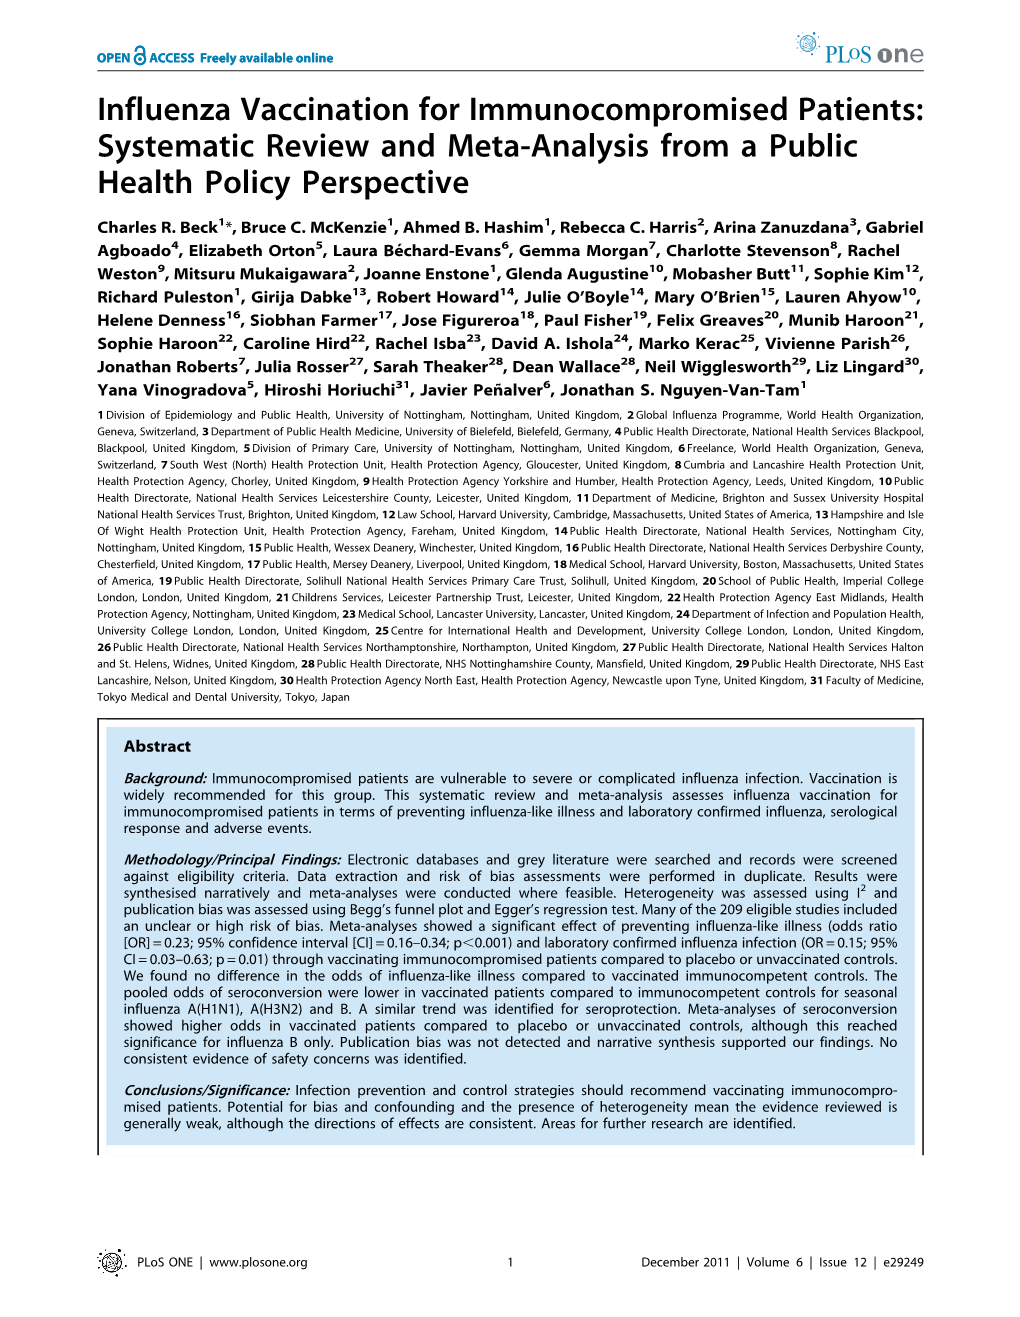 Influenza Vaccination for Immunocompromised Patients: Systematic Review and Meta-Analysis from a Public Health Policy Perspective